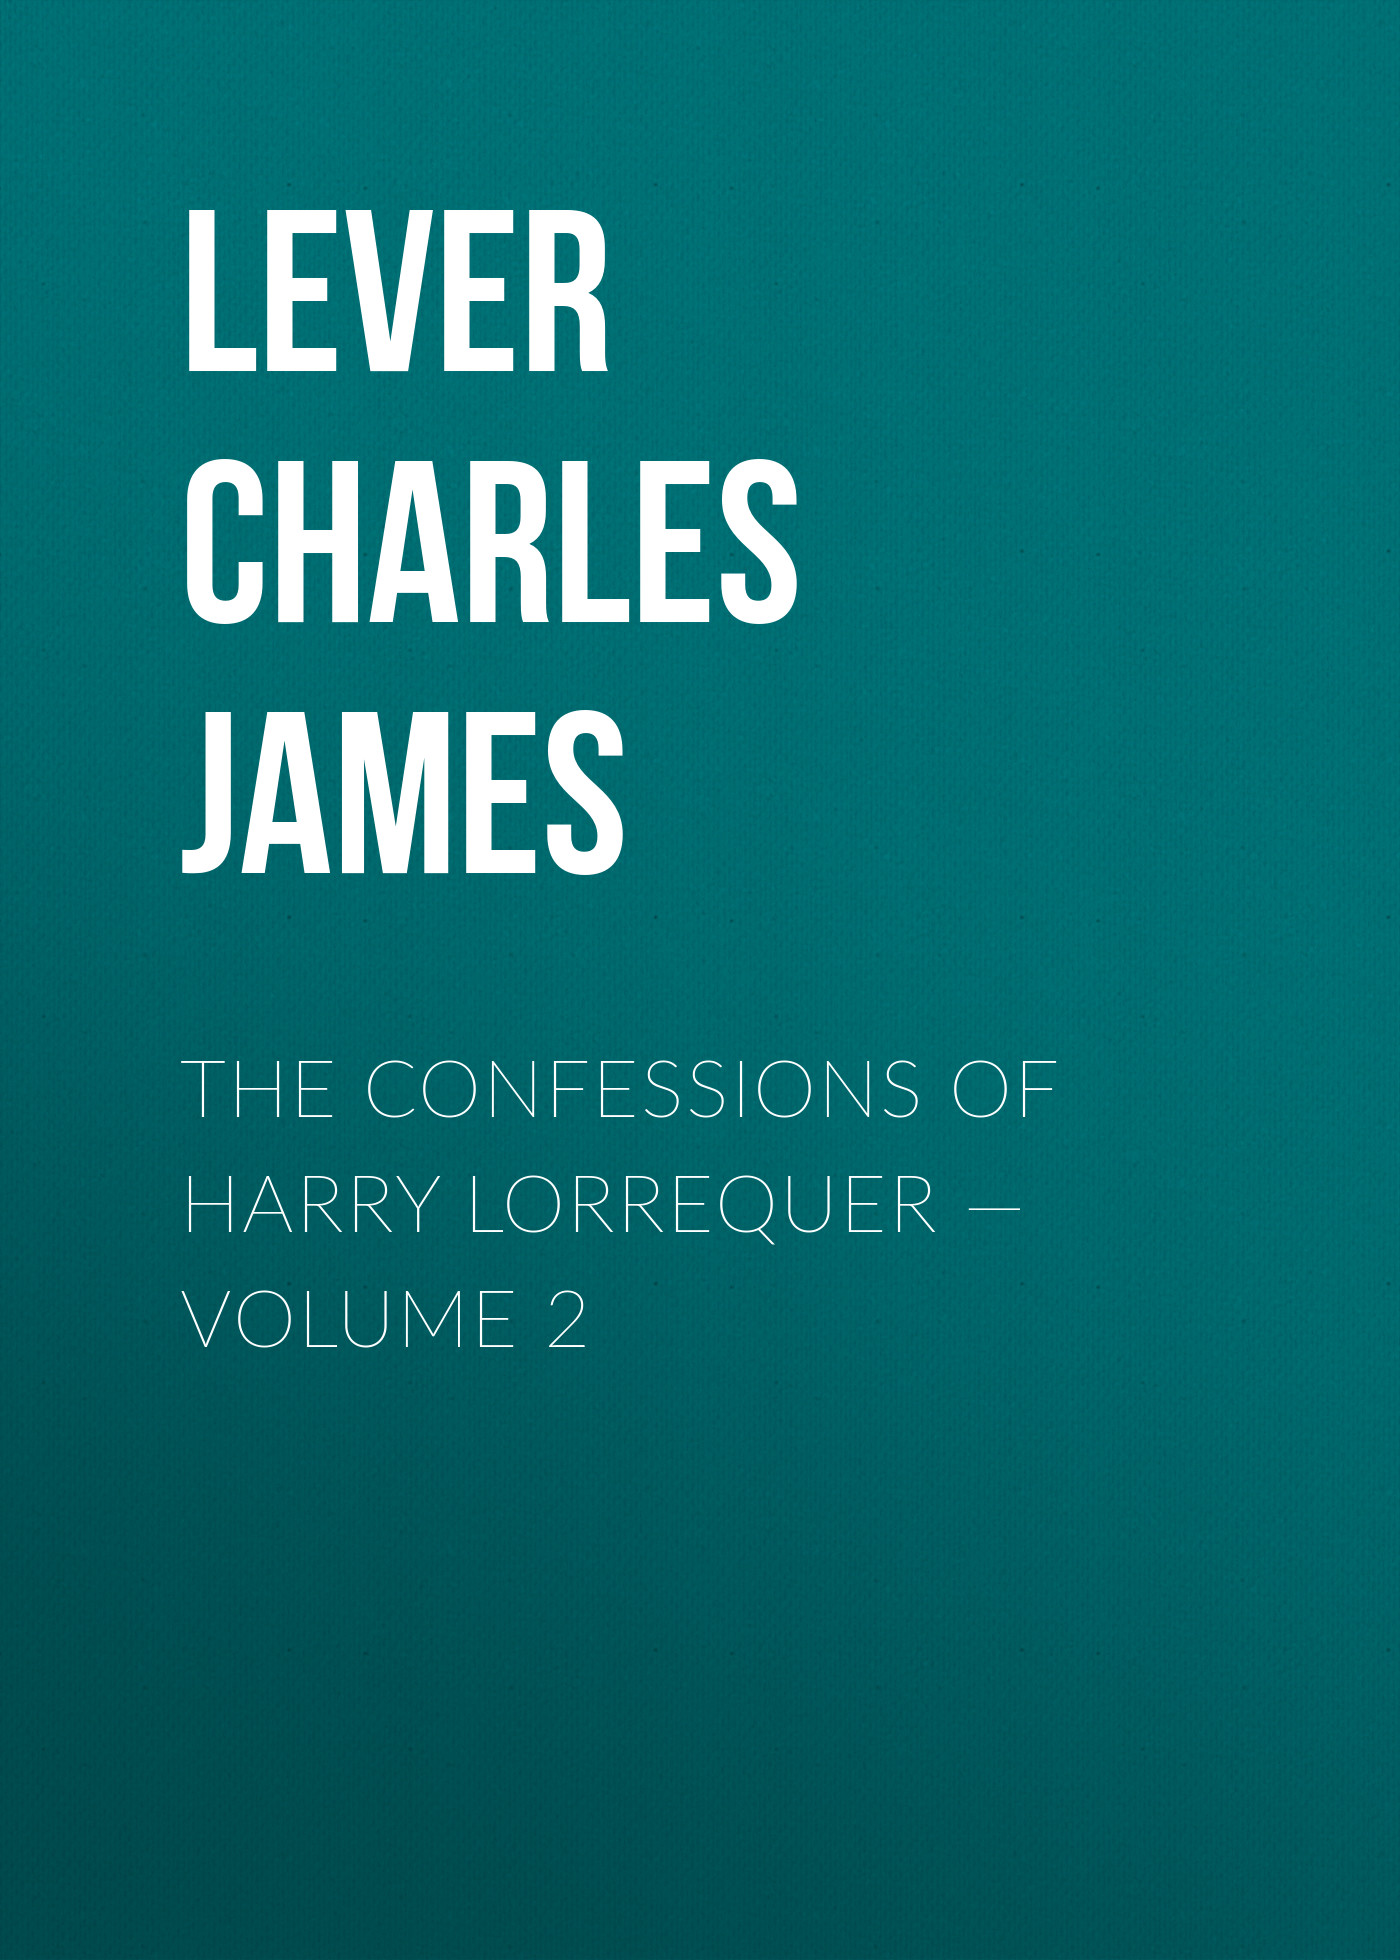 The Confessions of Harry Lorrequer— Volume 2